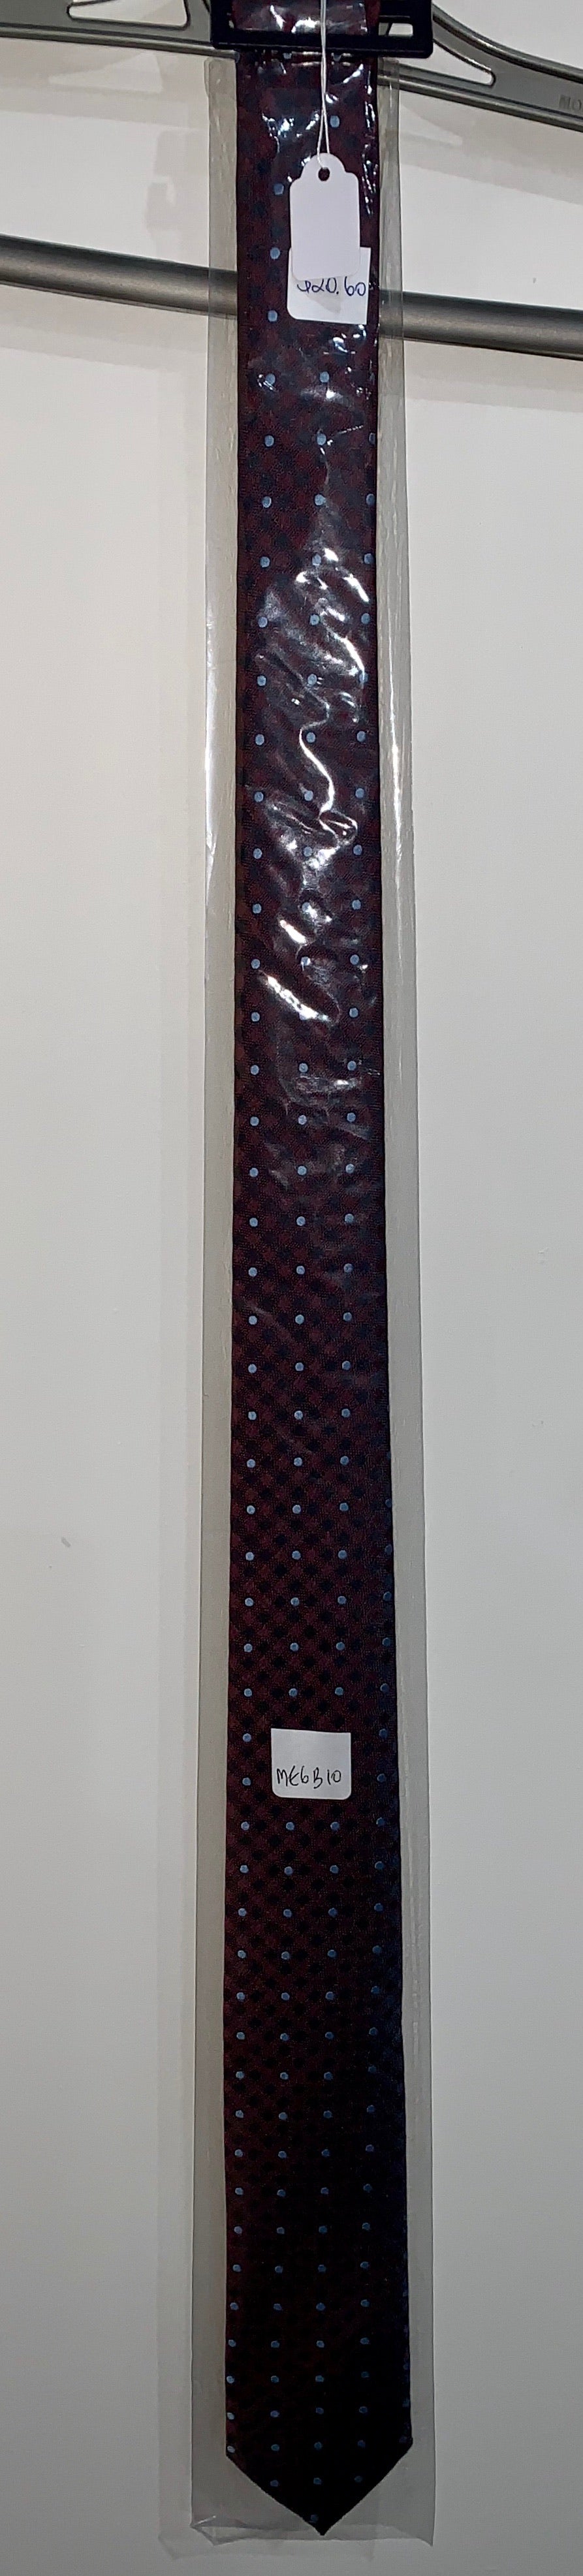 TIE, BLACK/MAROON SQUARES WITH BLUE DOTS